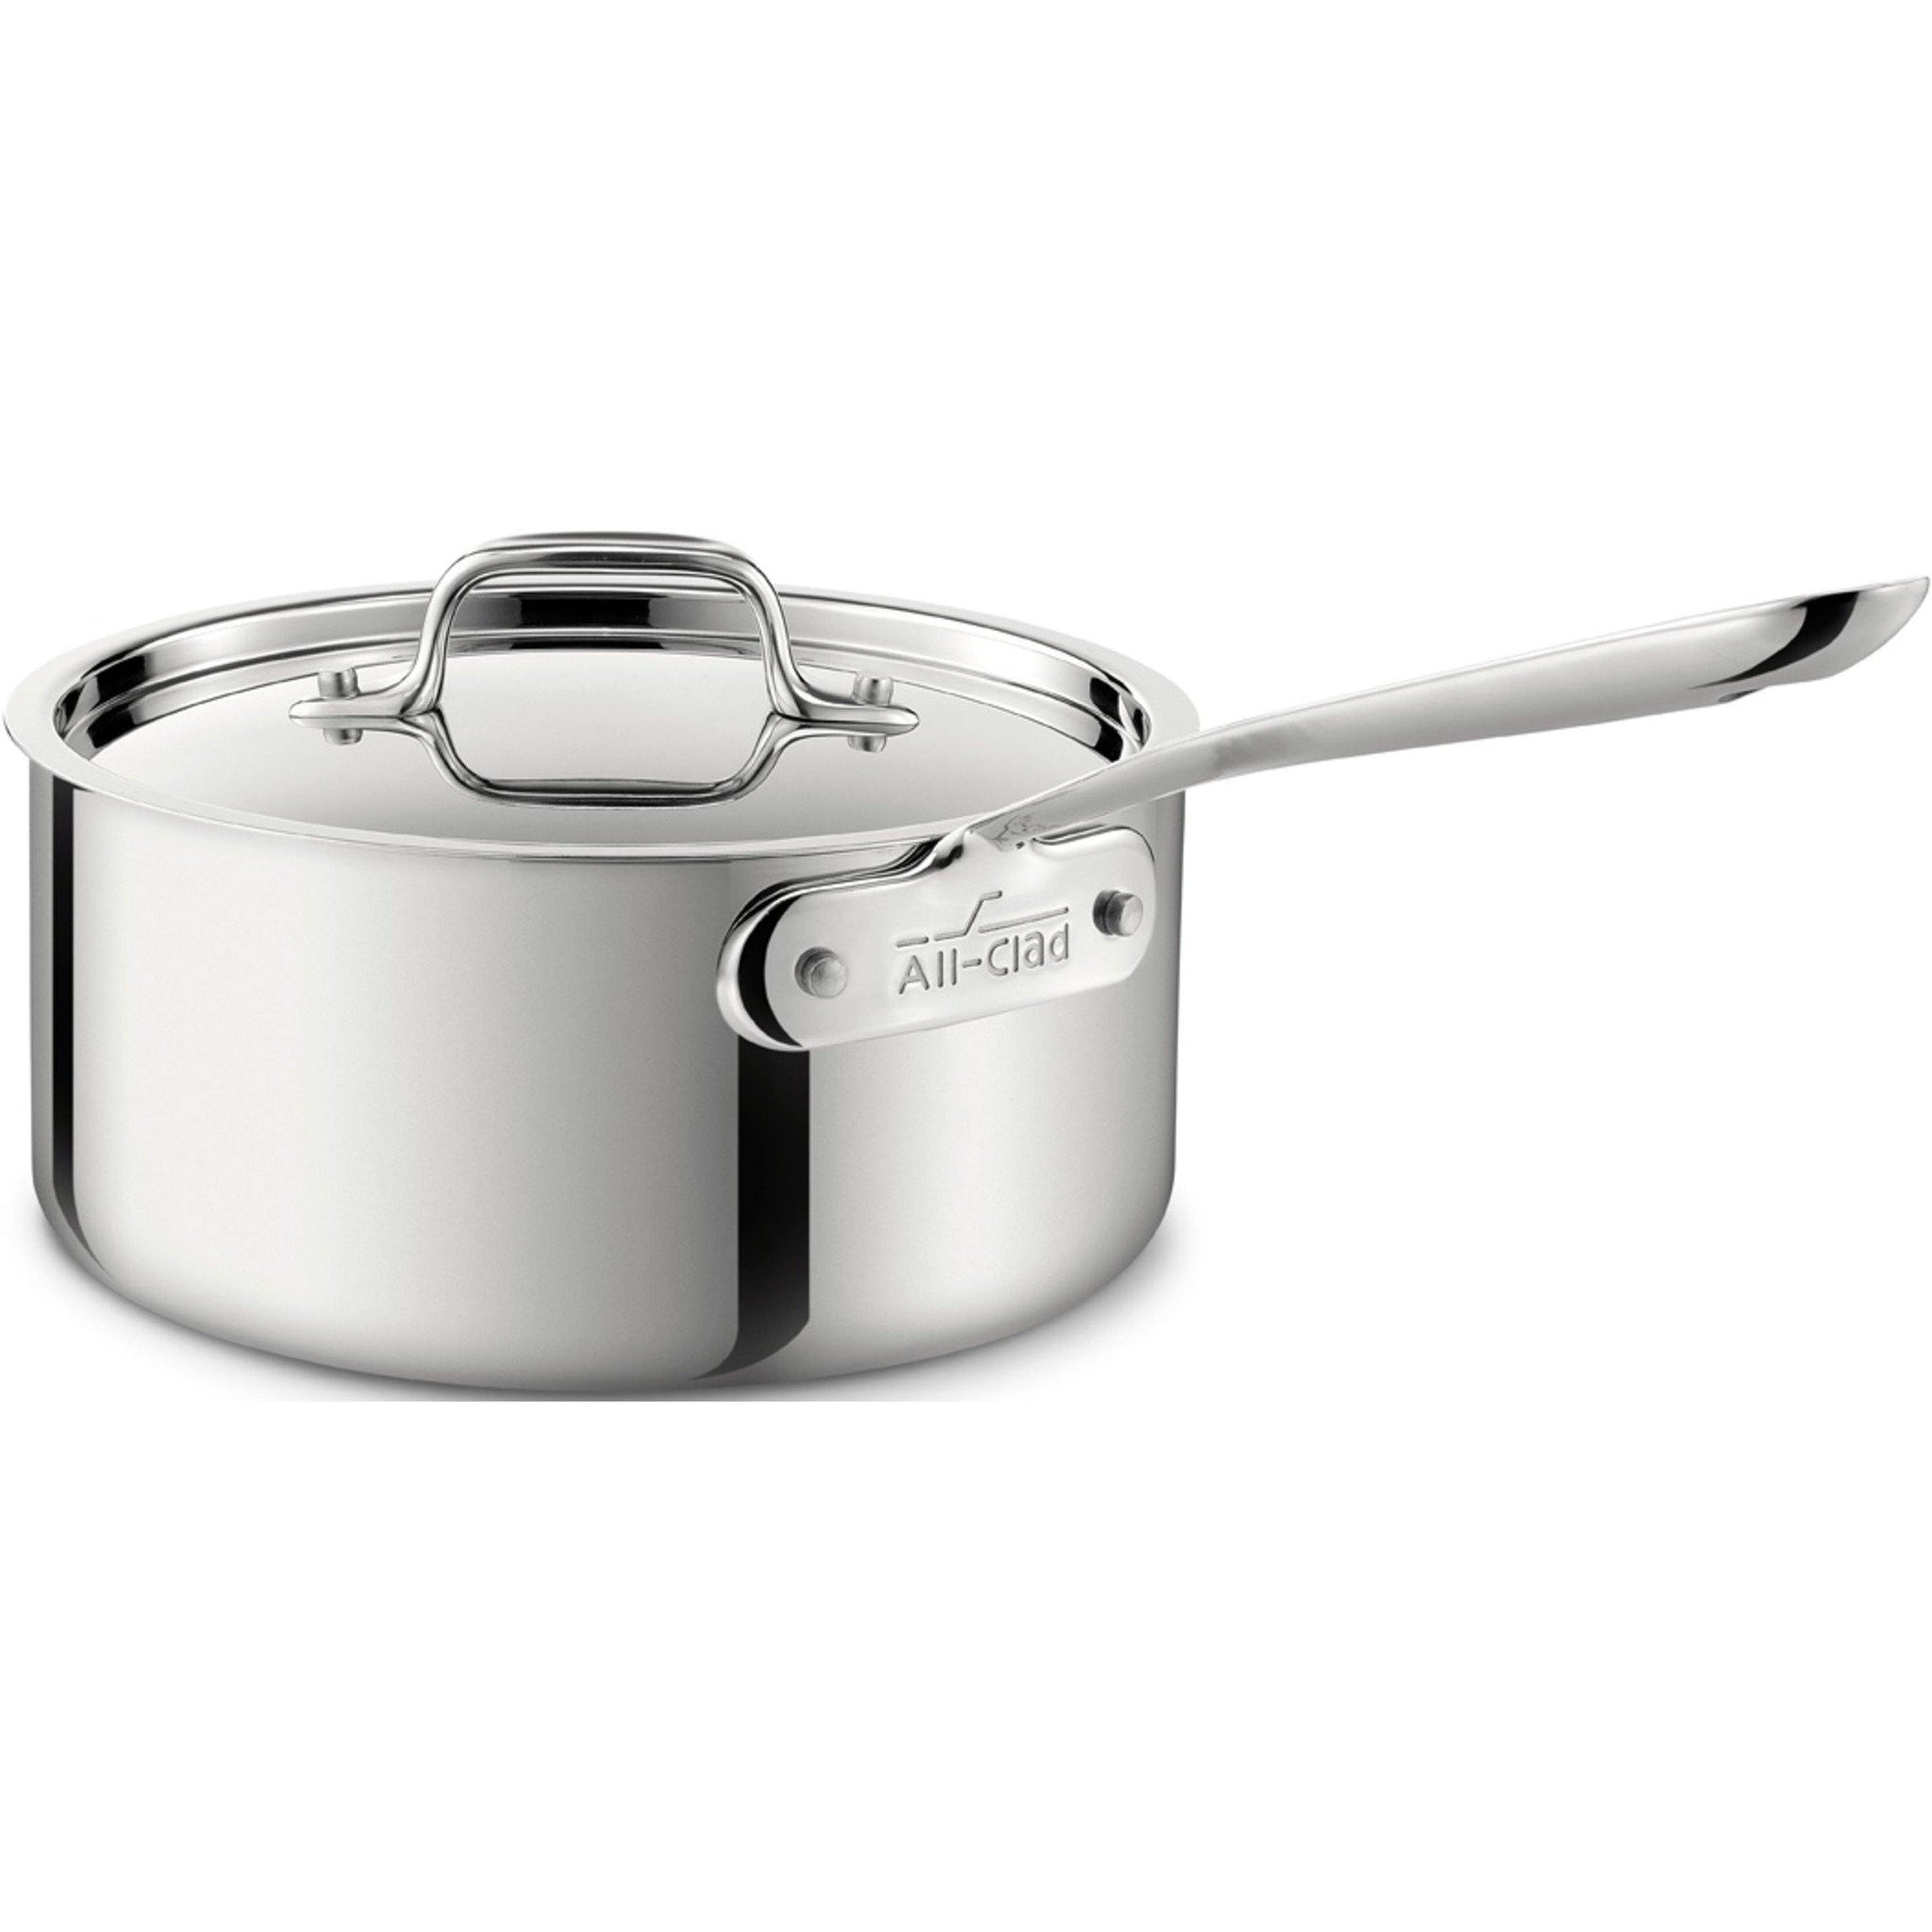 All-Clad, 4203, 3 Qt. Stainless Steel Sauce Pan with Lid, 3-Ply Bonded Construction